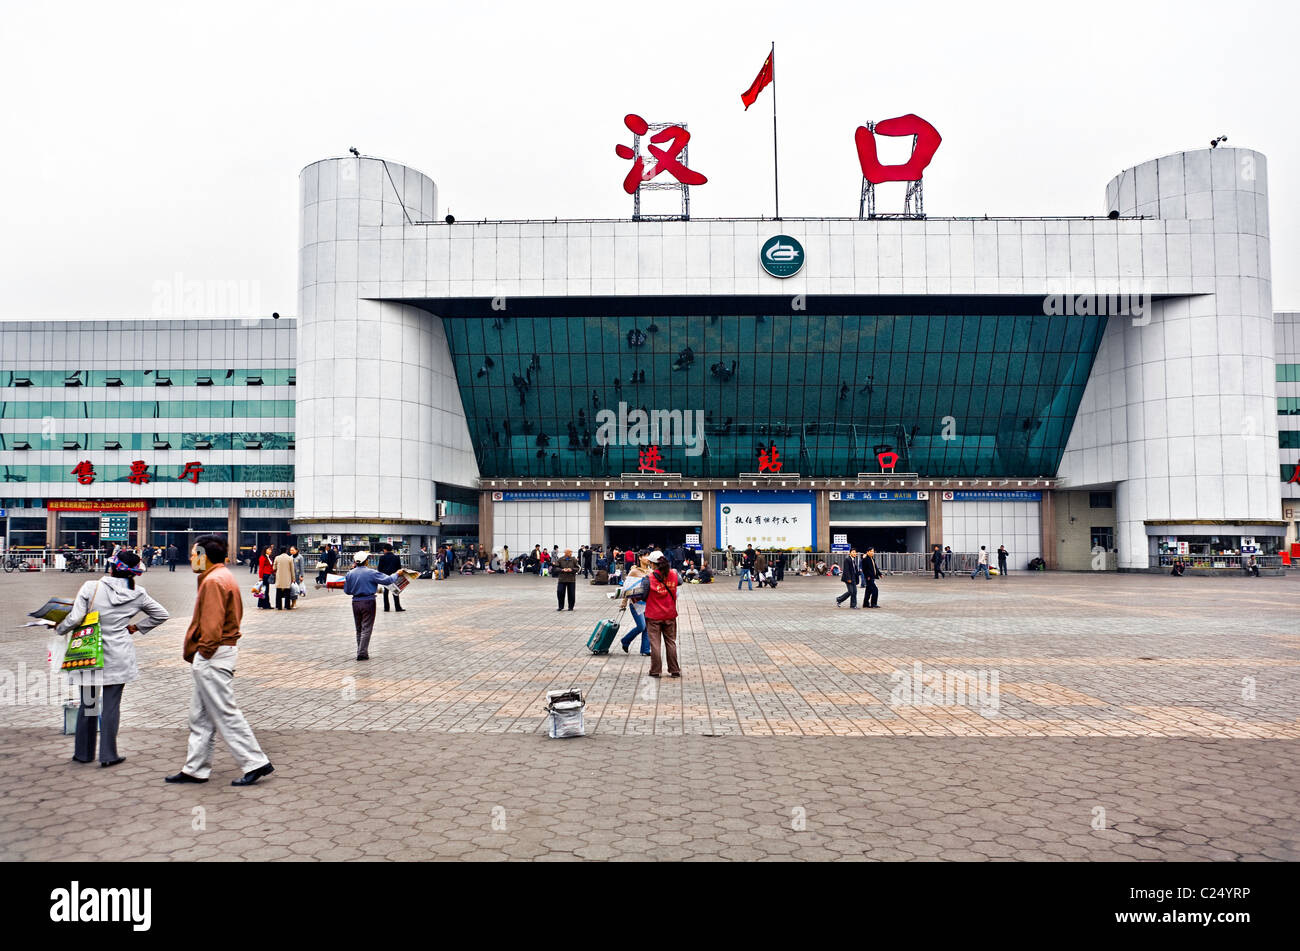 CHINA, WUHAN: Hankou Railway Station in Wuhan with plaza and people reflected in the mirrors on the front of the station. Photo Stock Photo